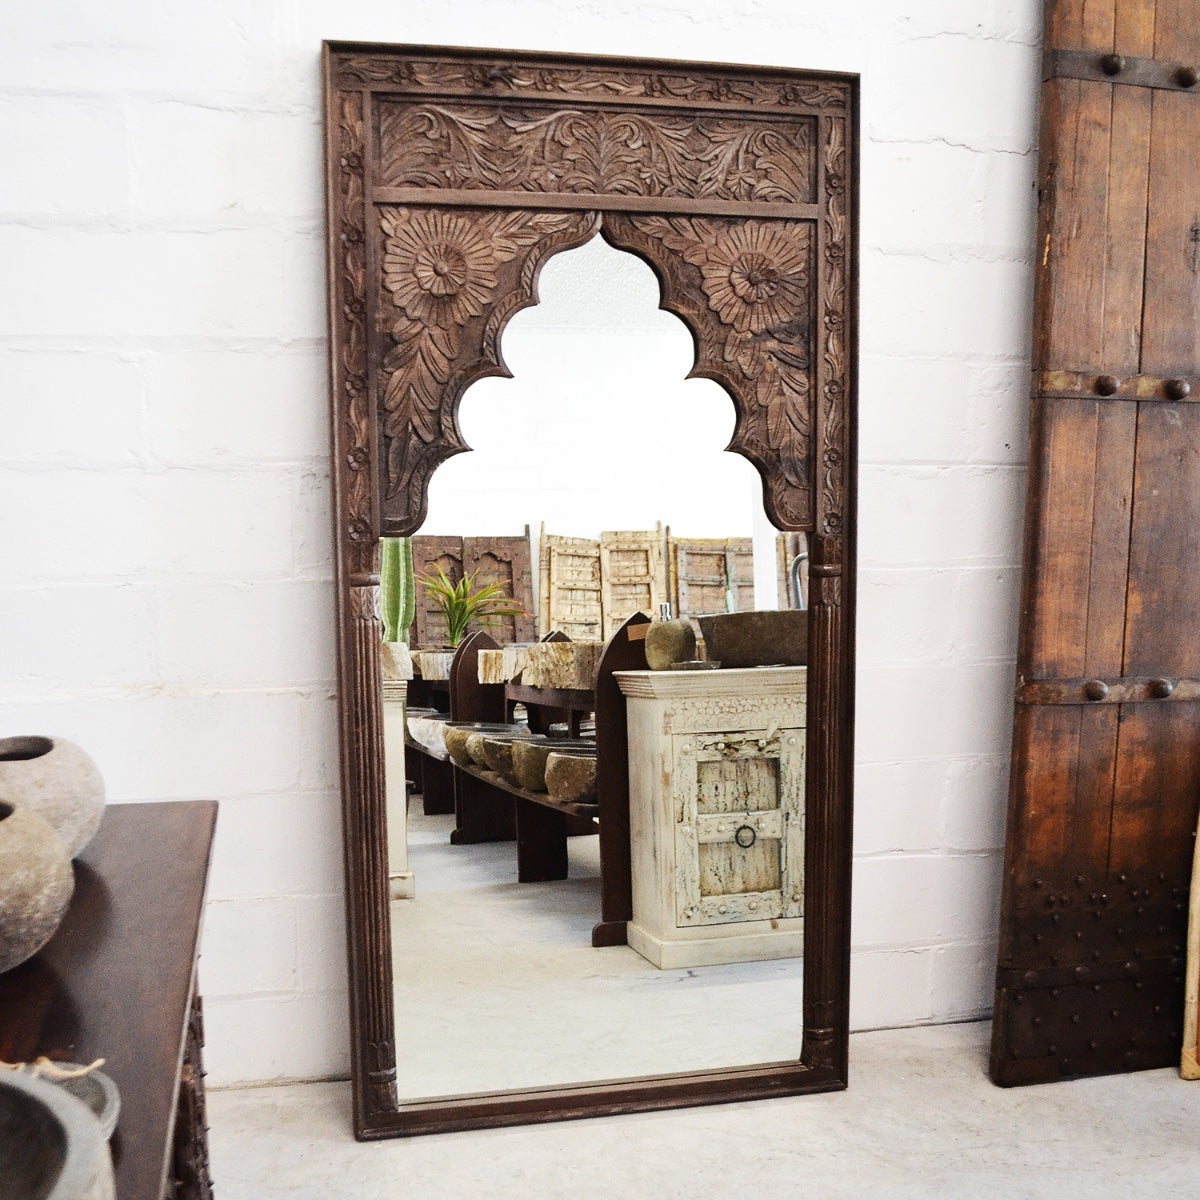 Natural Indian Arch Mirror 100x200cm